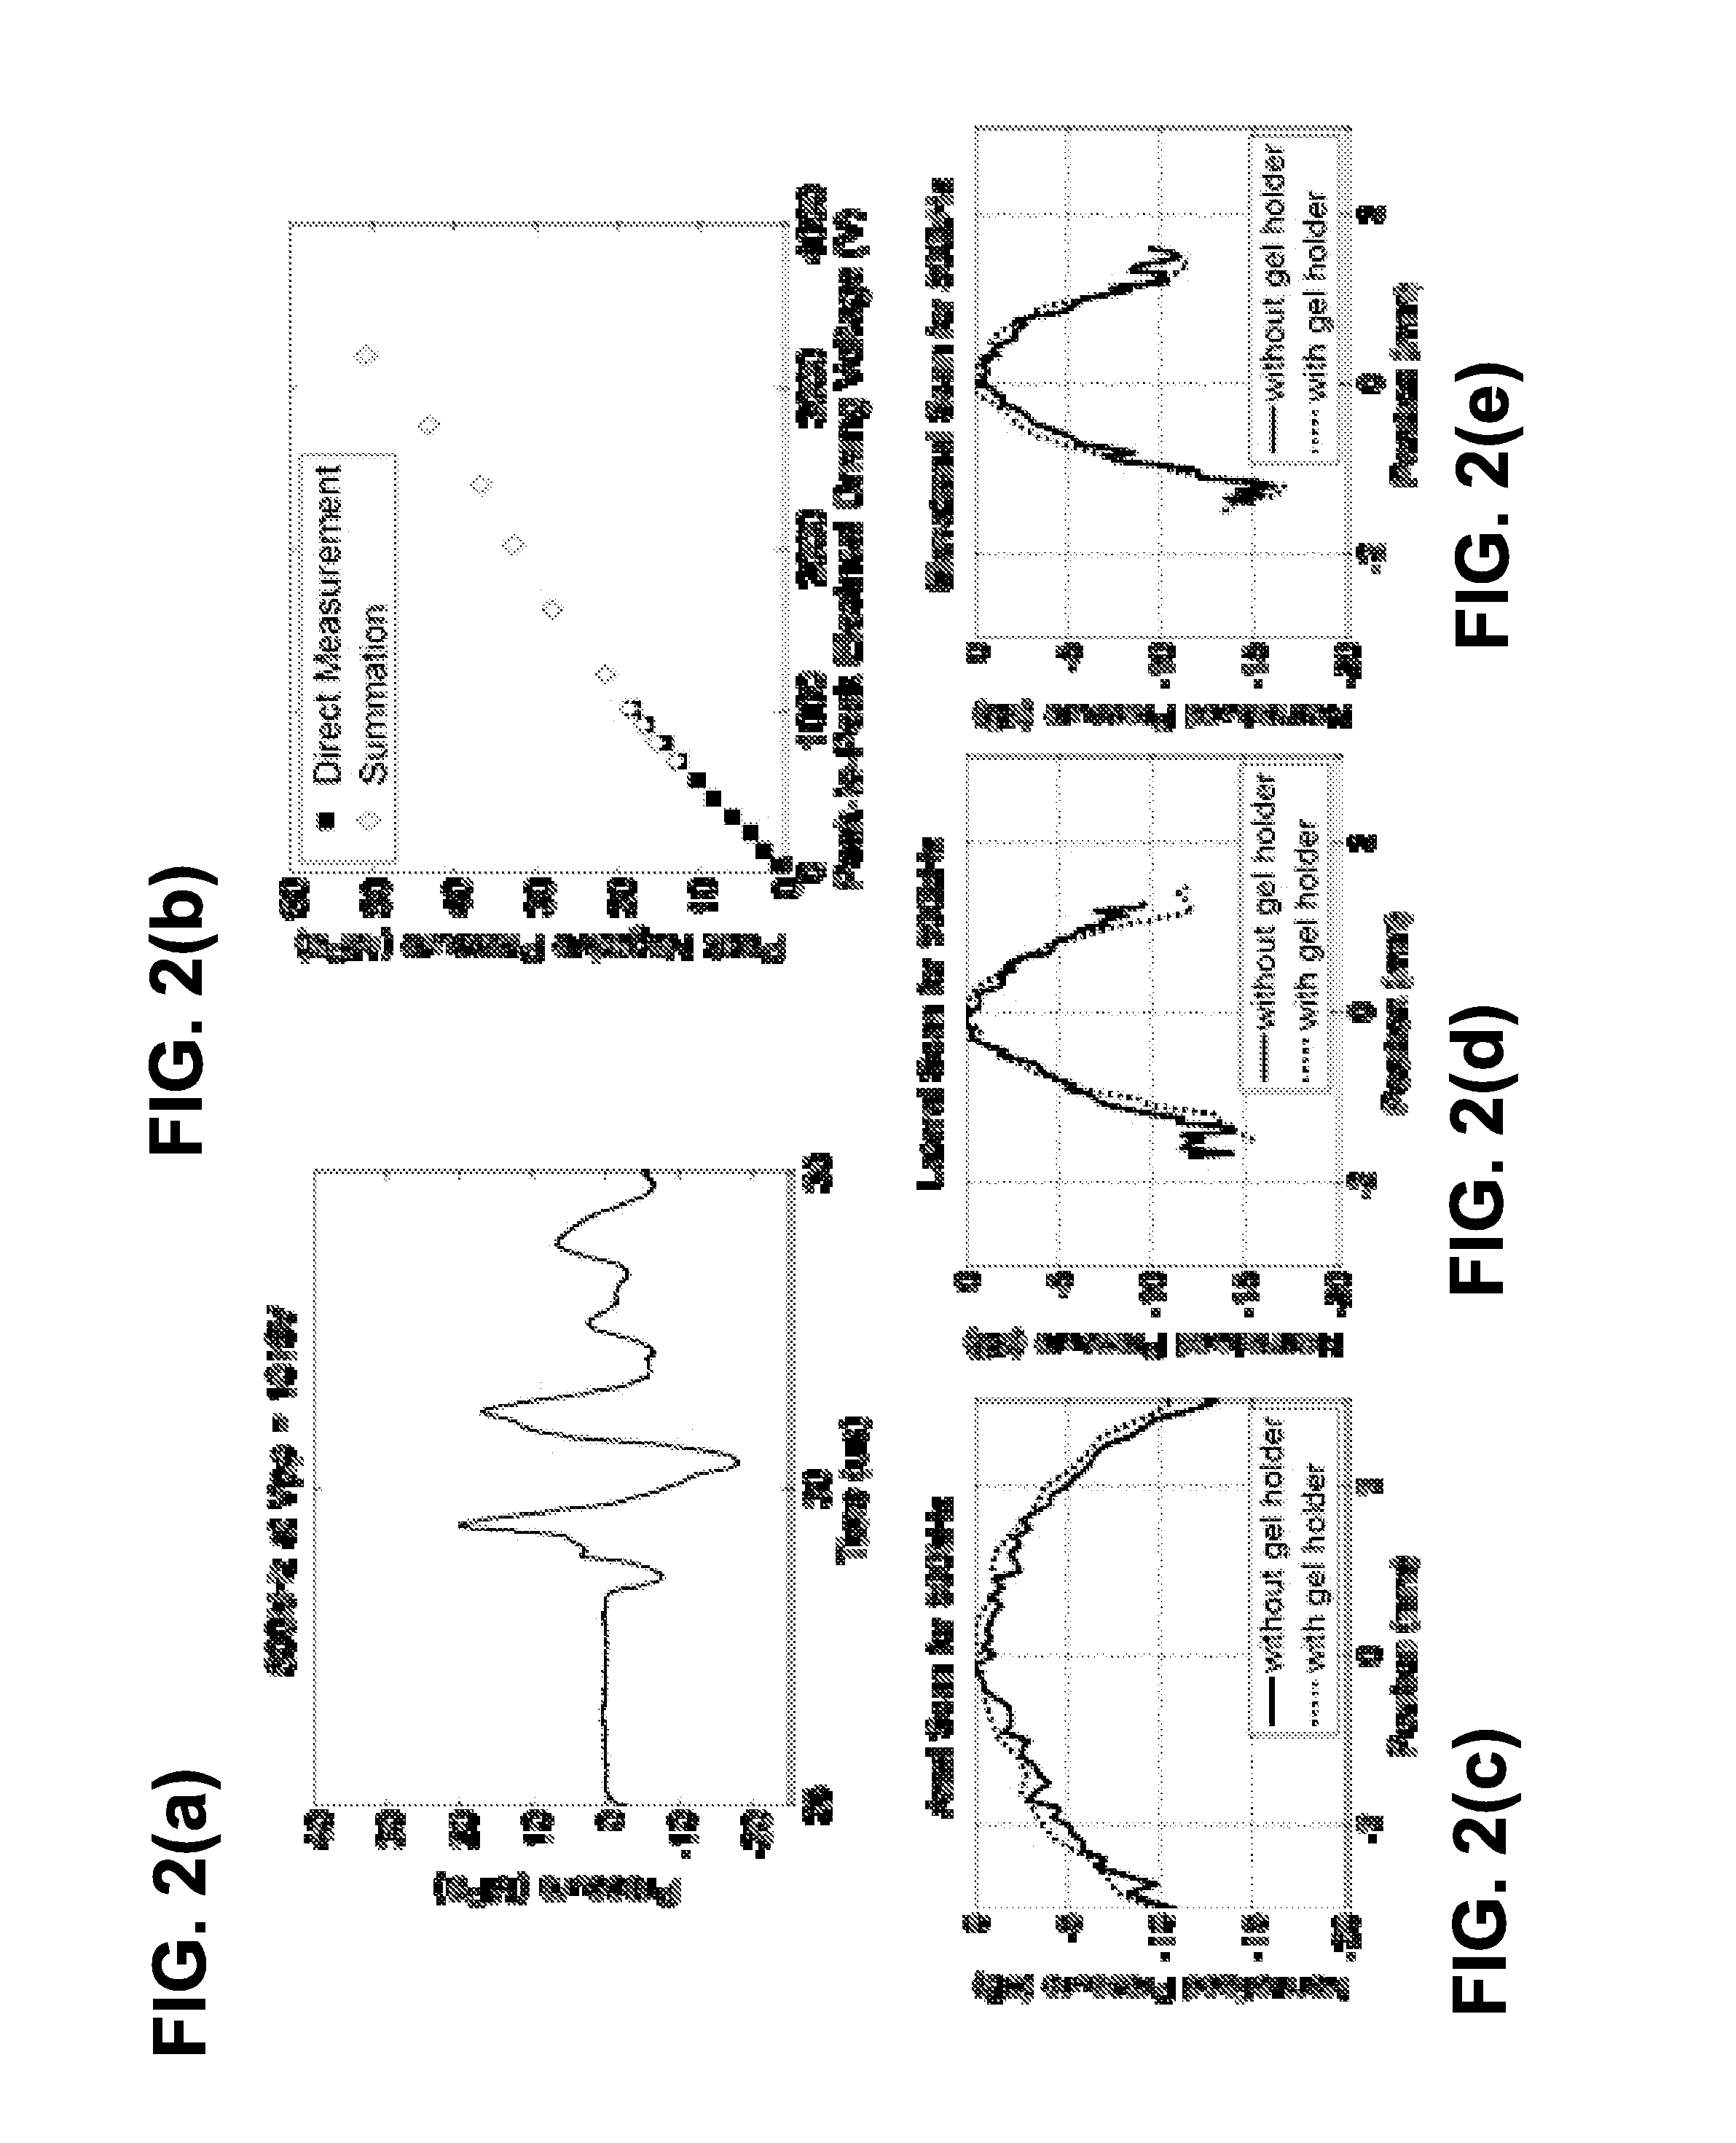 Frequency compounding ultrasound pulses for imaging and therapy